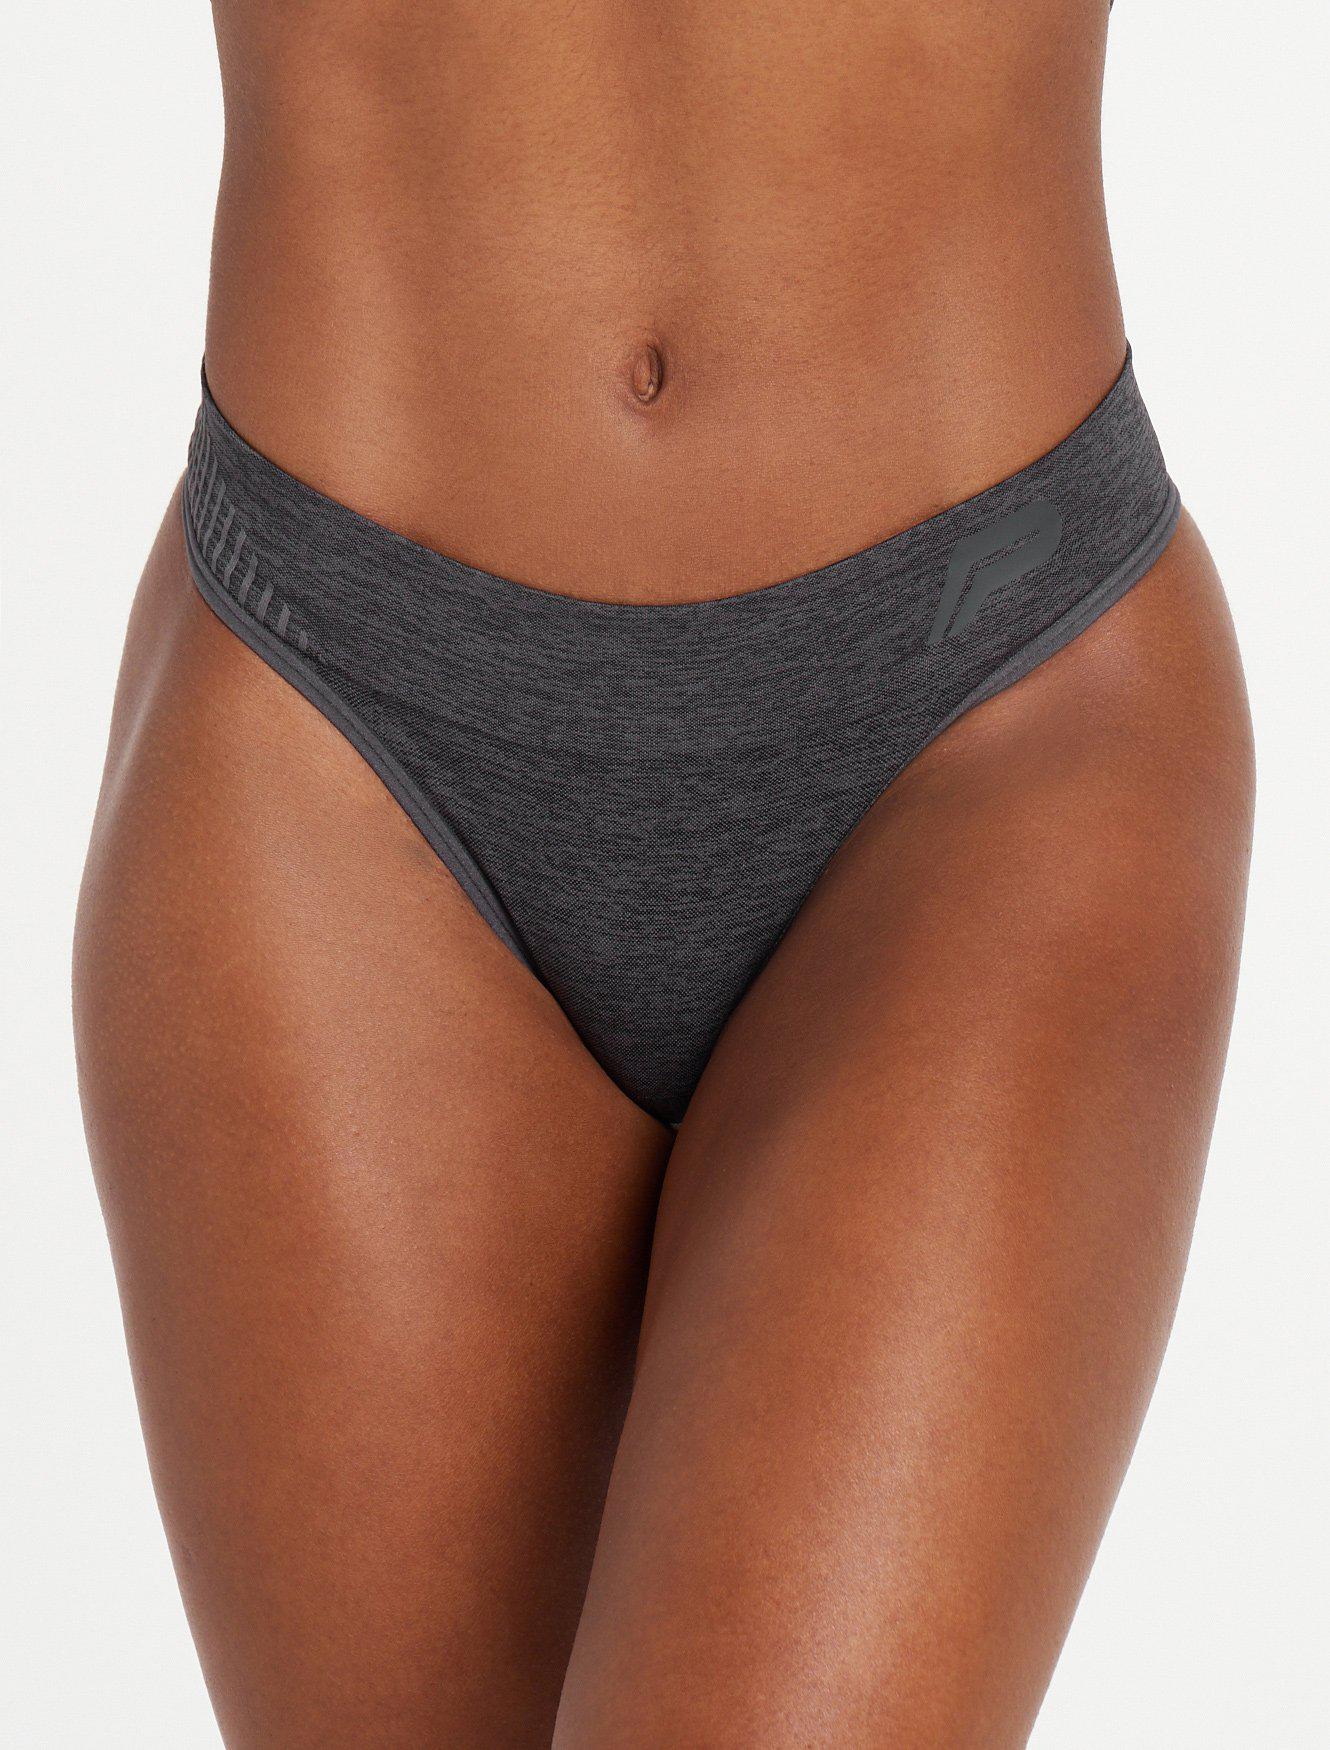 ADAPT Seamless Thong / Black.Charcoal Pursue Fitness 1